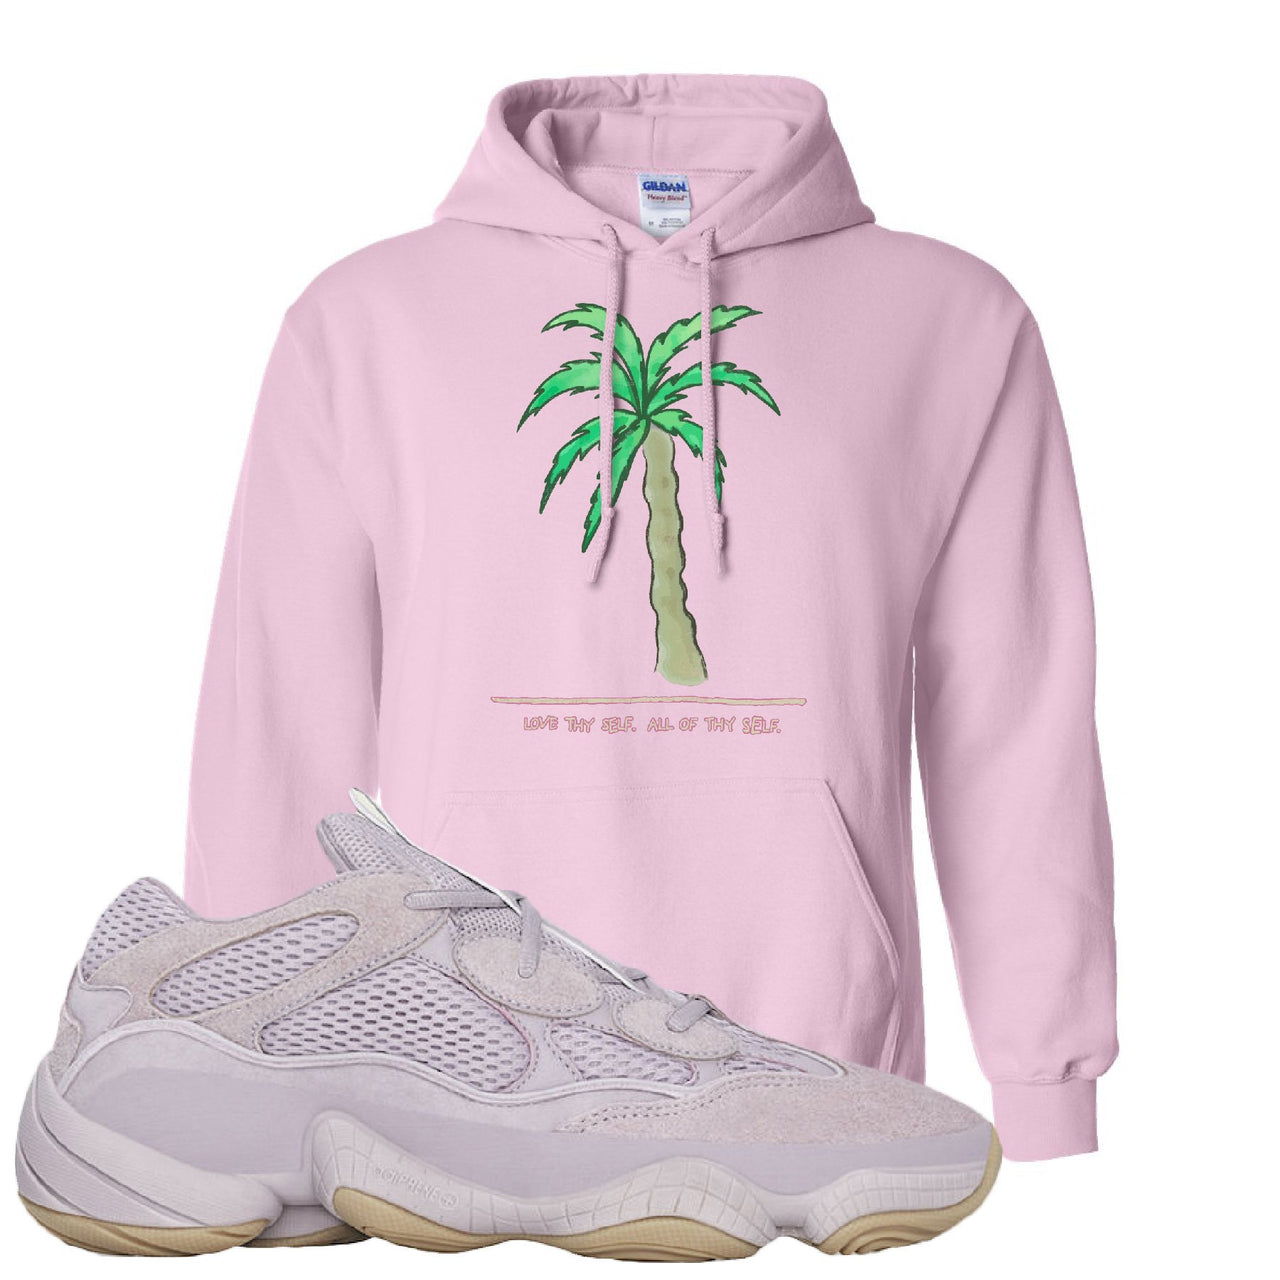 Yeezy 500 Soft Vision Love Thyself Palm Classic Pink Sneaker Hook Up Pullover Hoodie